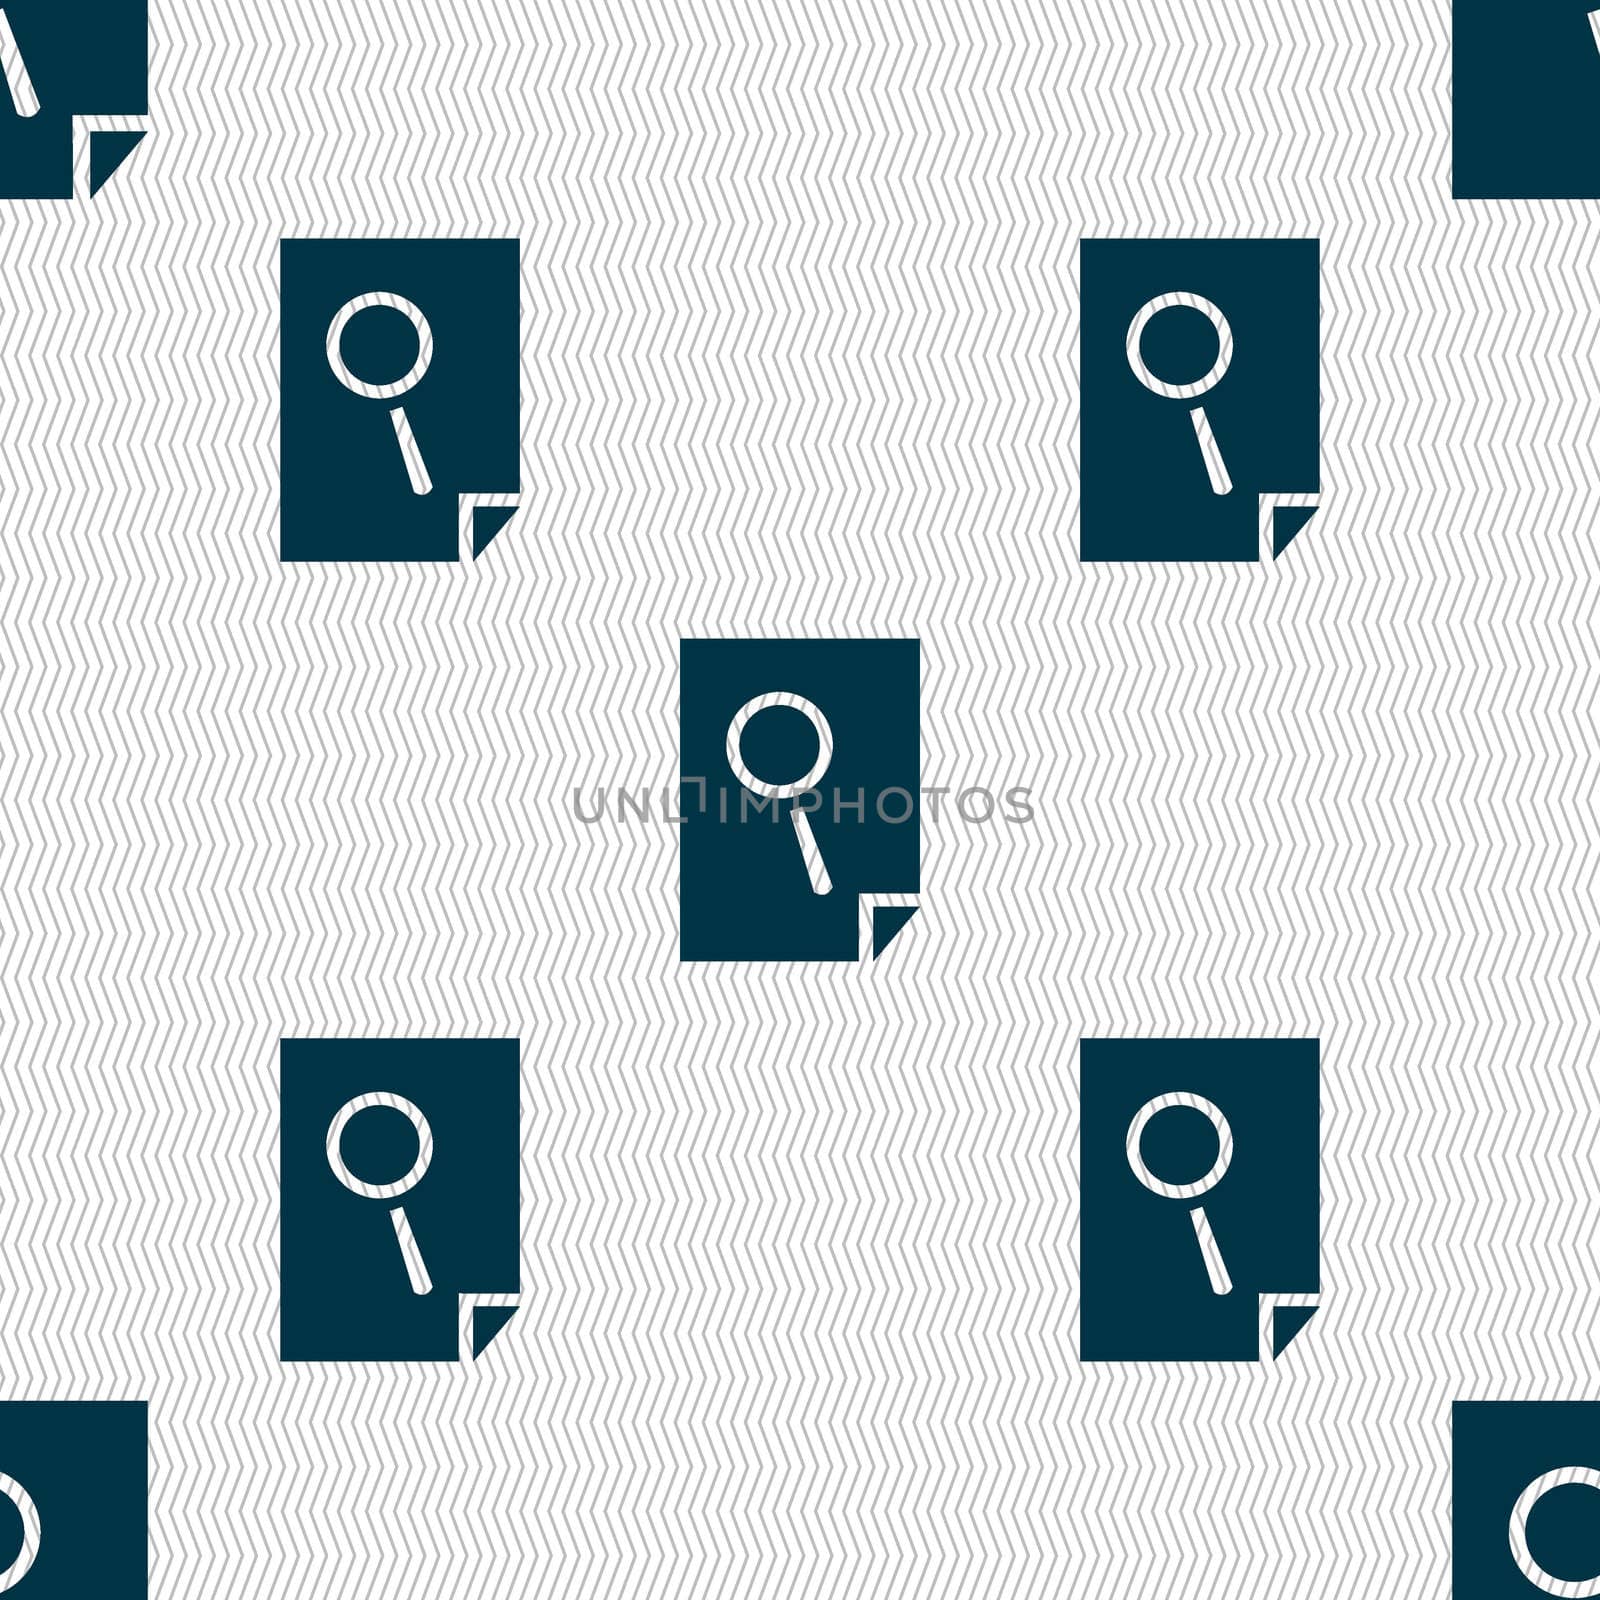 Search in file sign icon. Find in document symbol. Seamless abstract background with geometric shapes. illustration